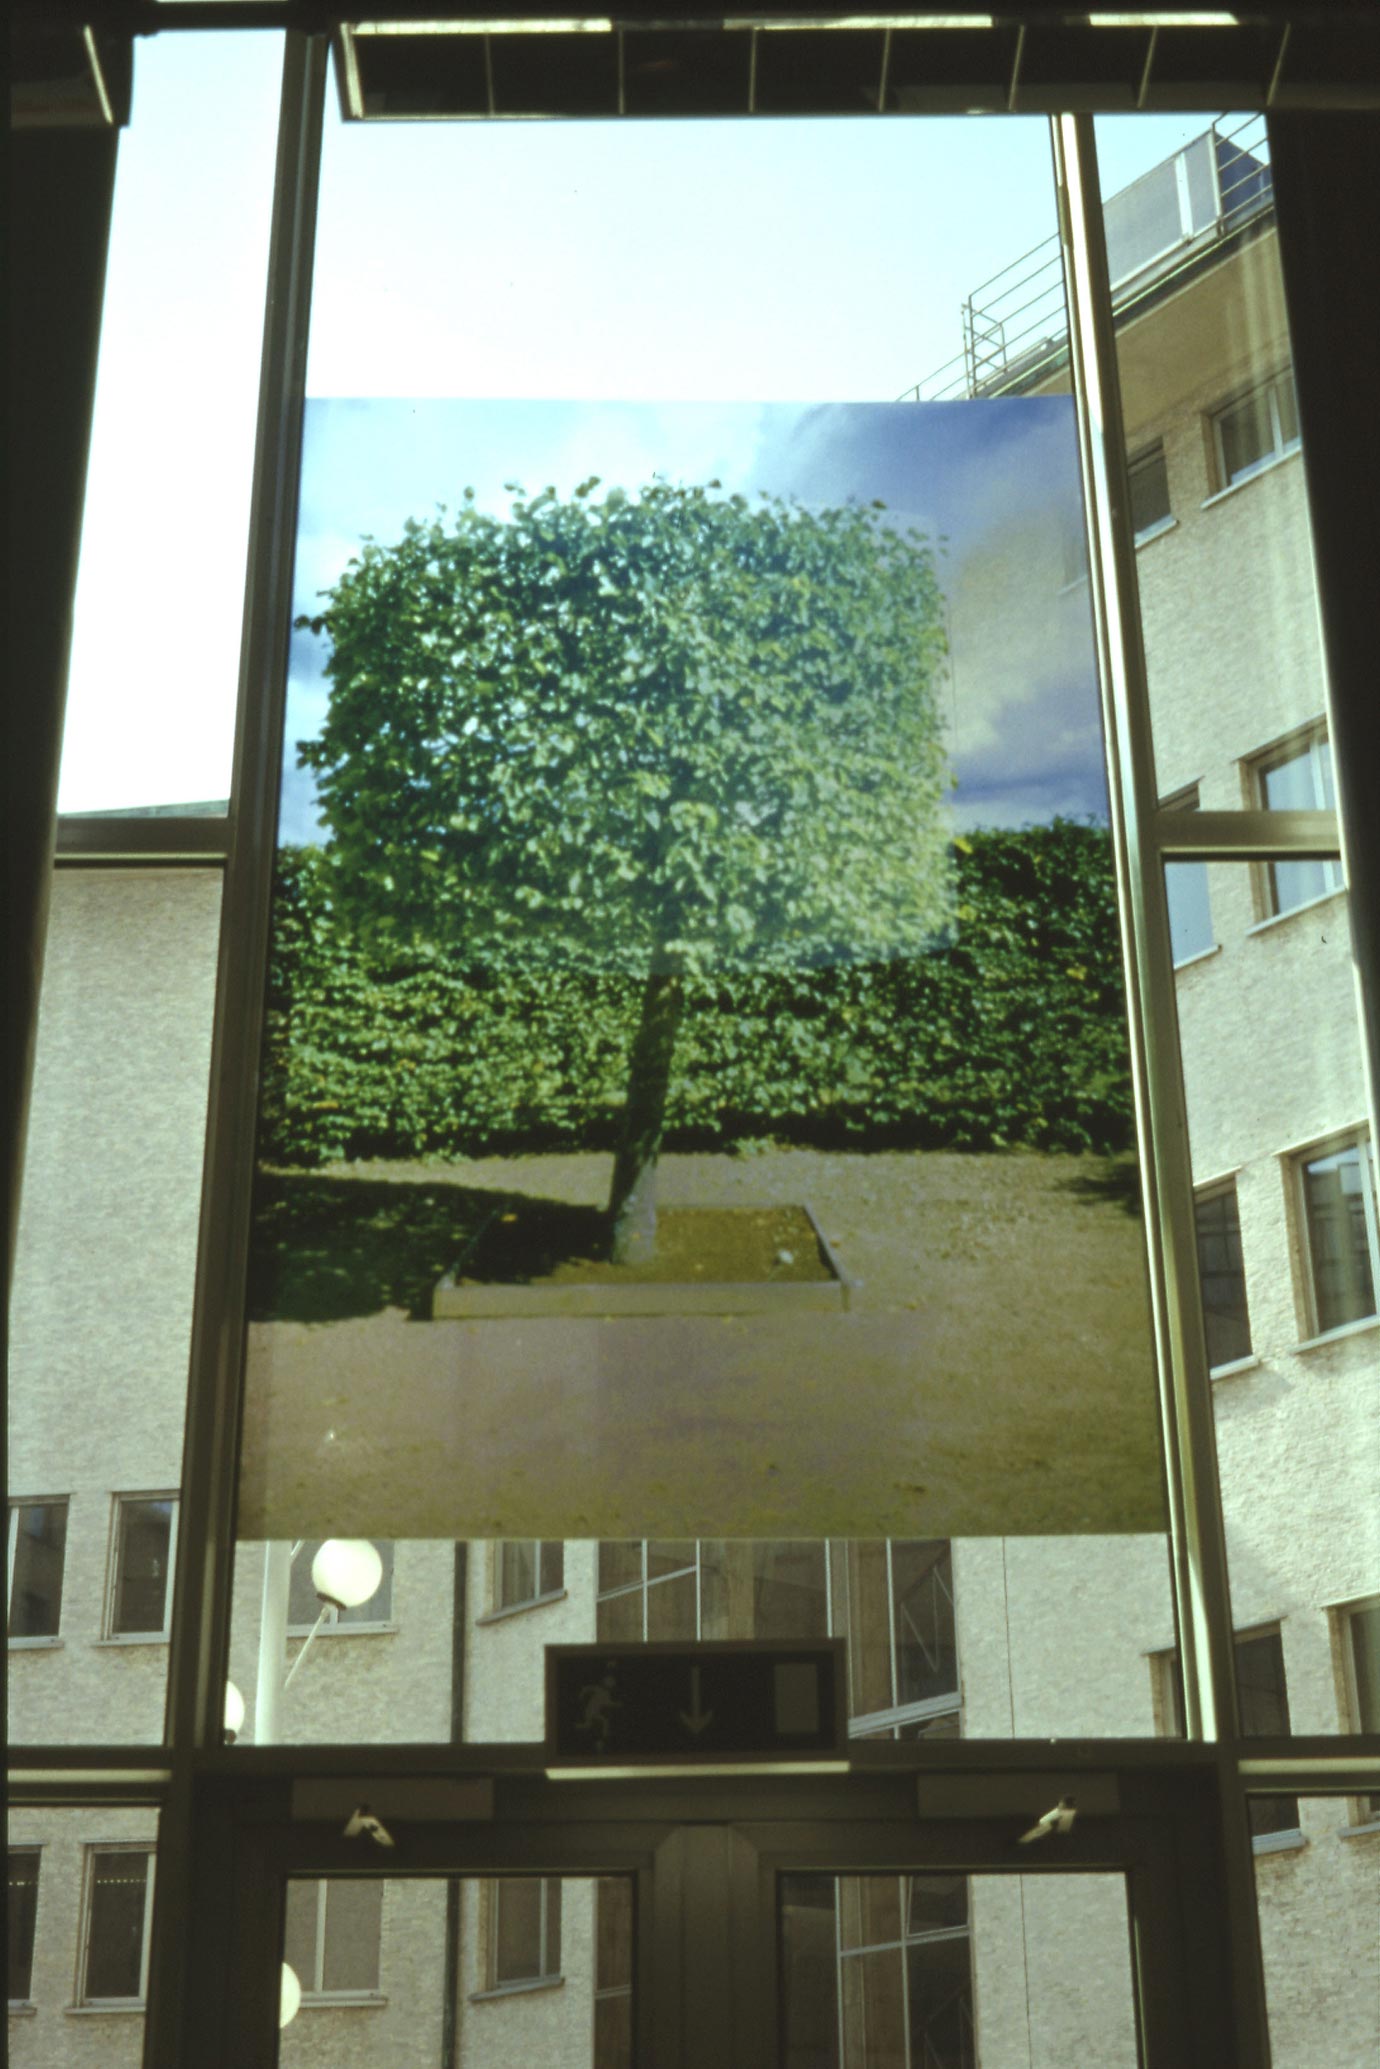 The photograph of the second tree